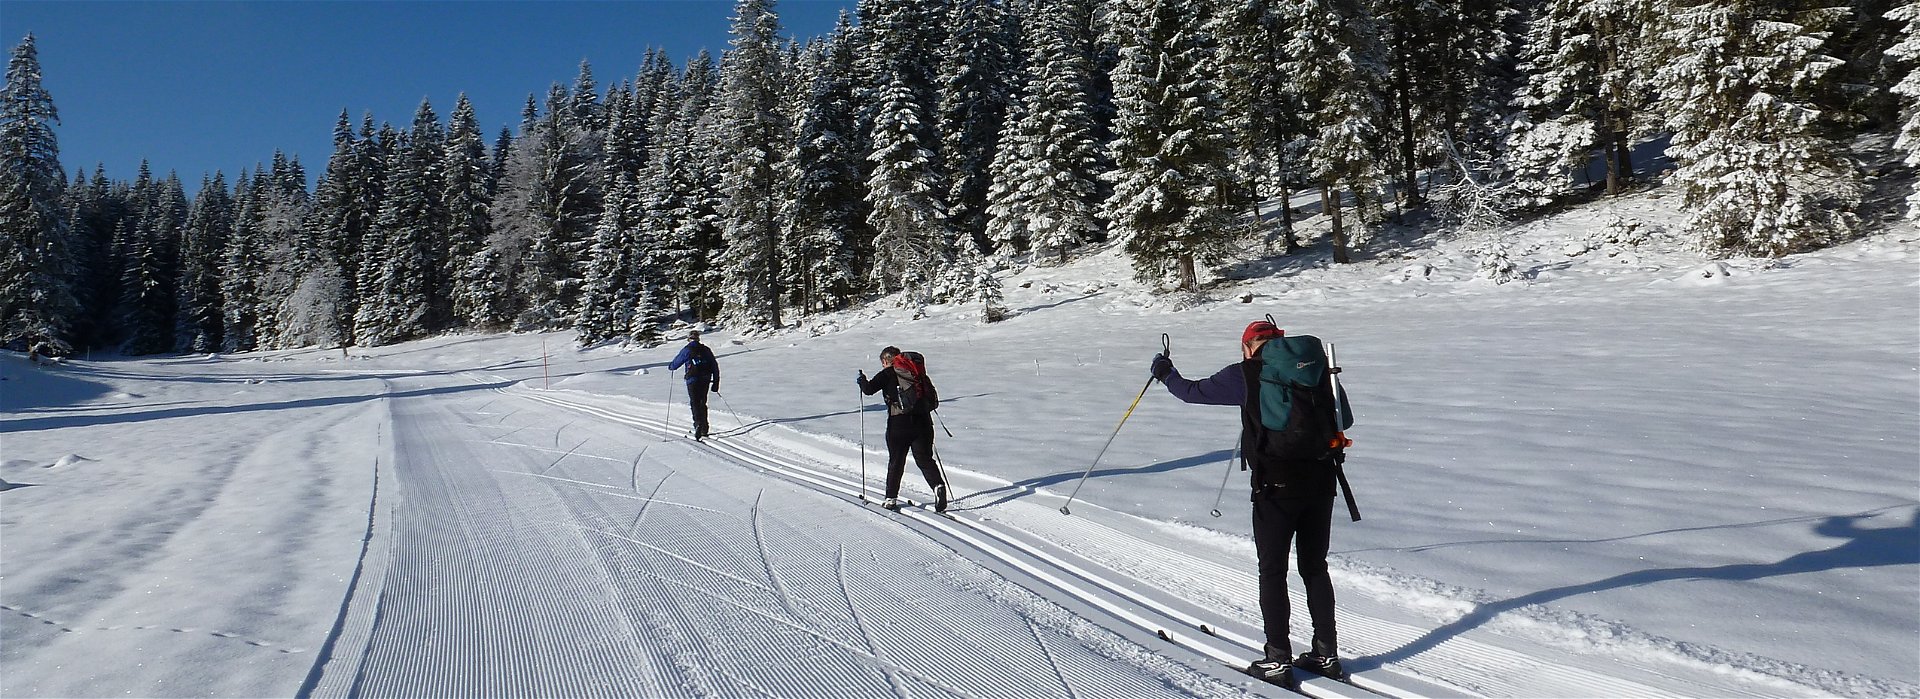 Cross-country skiing: a beginner's guide